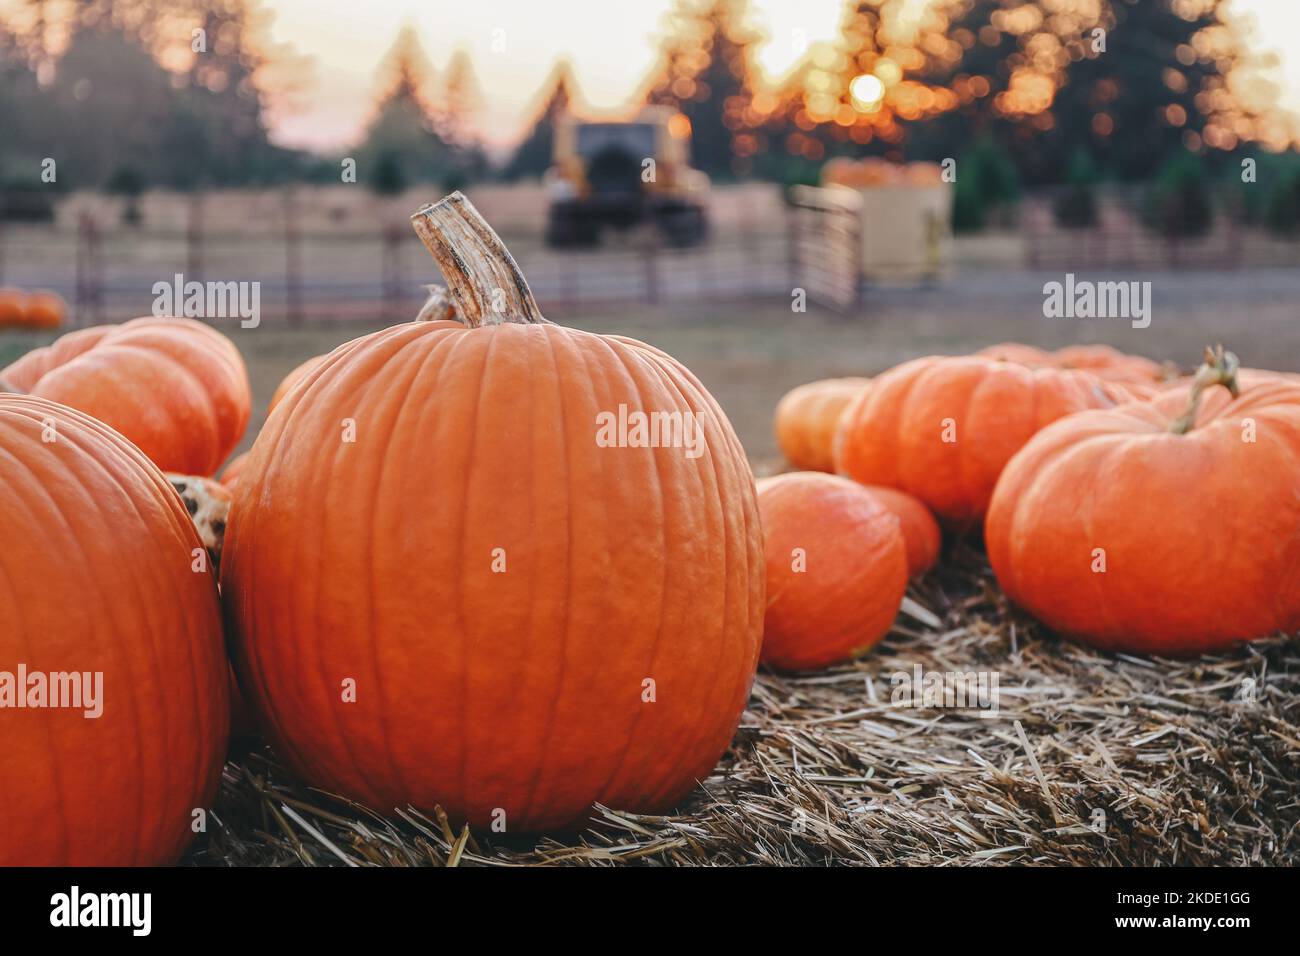 Orange pumpkins on hay bale at a fall festival during sunset Stock Photo